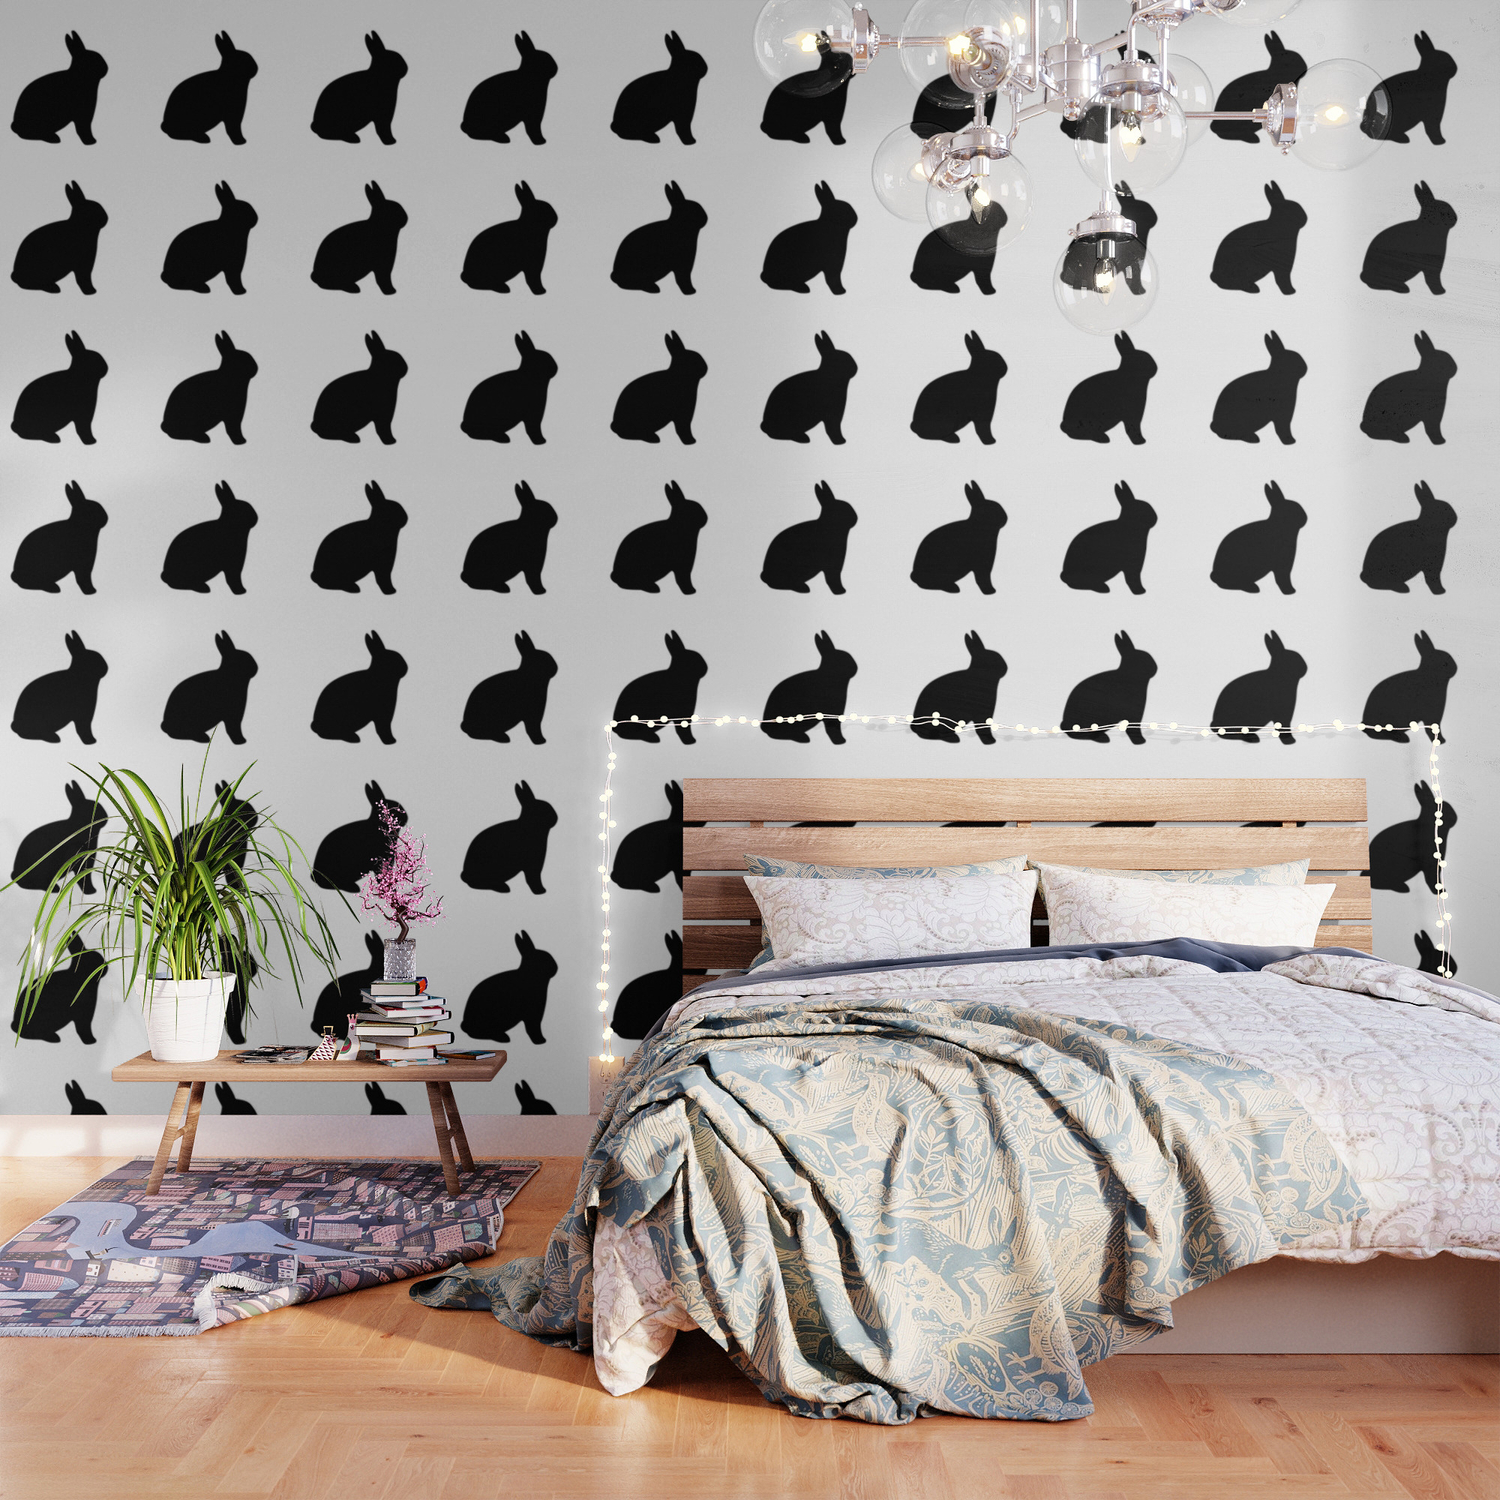 Black Rabbit Silhouette | Black Bunny Wallpaper by Lilith & Eve | Society6